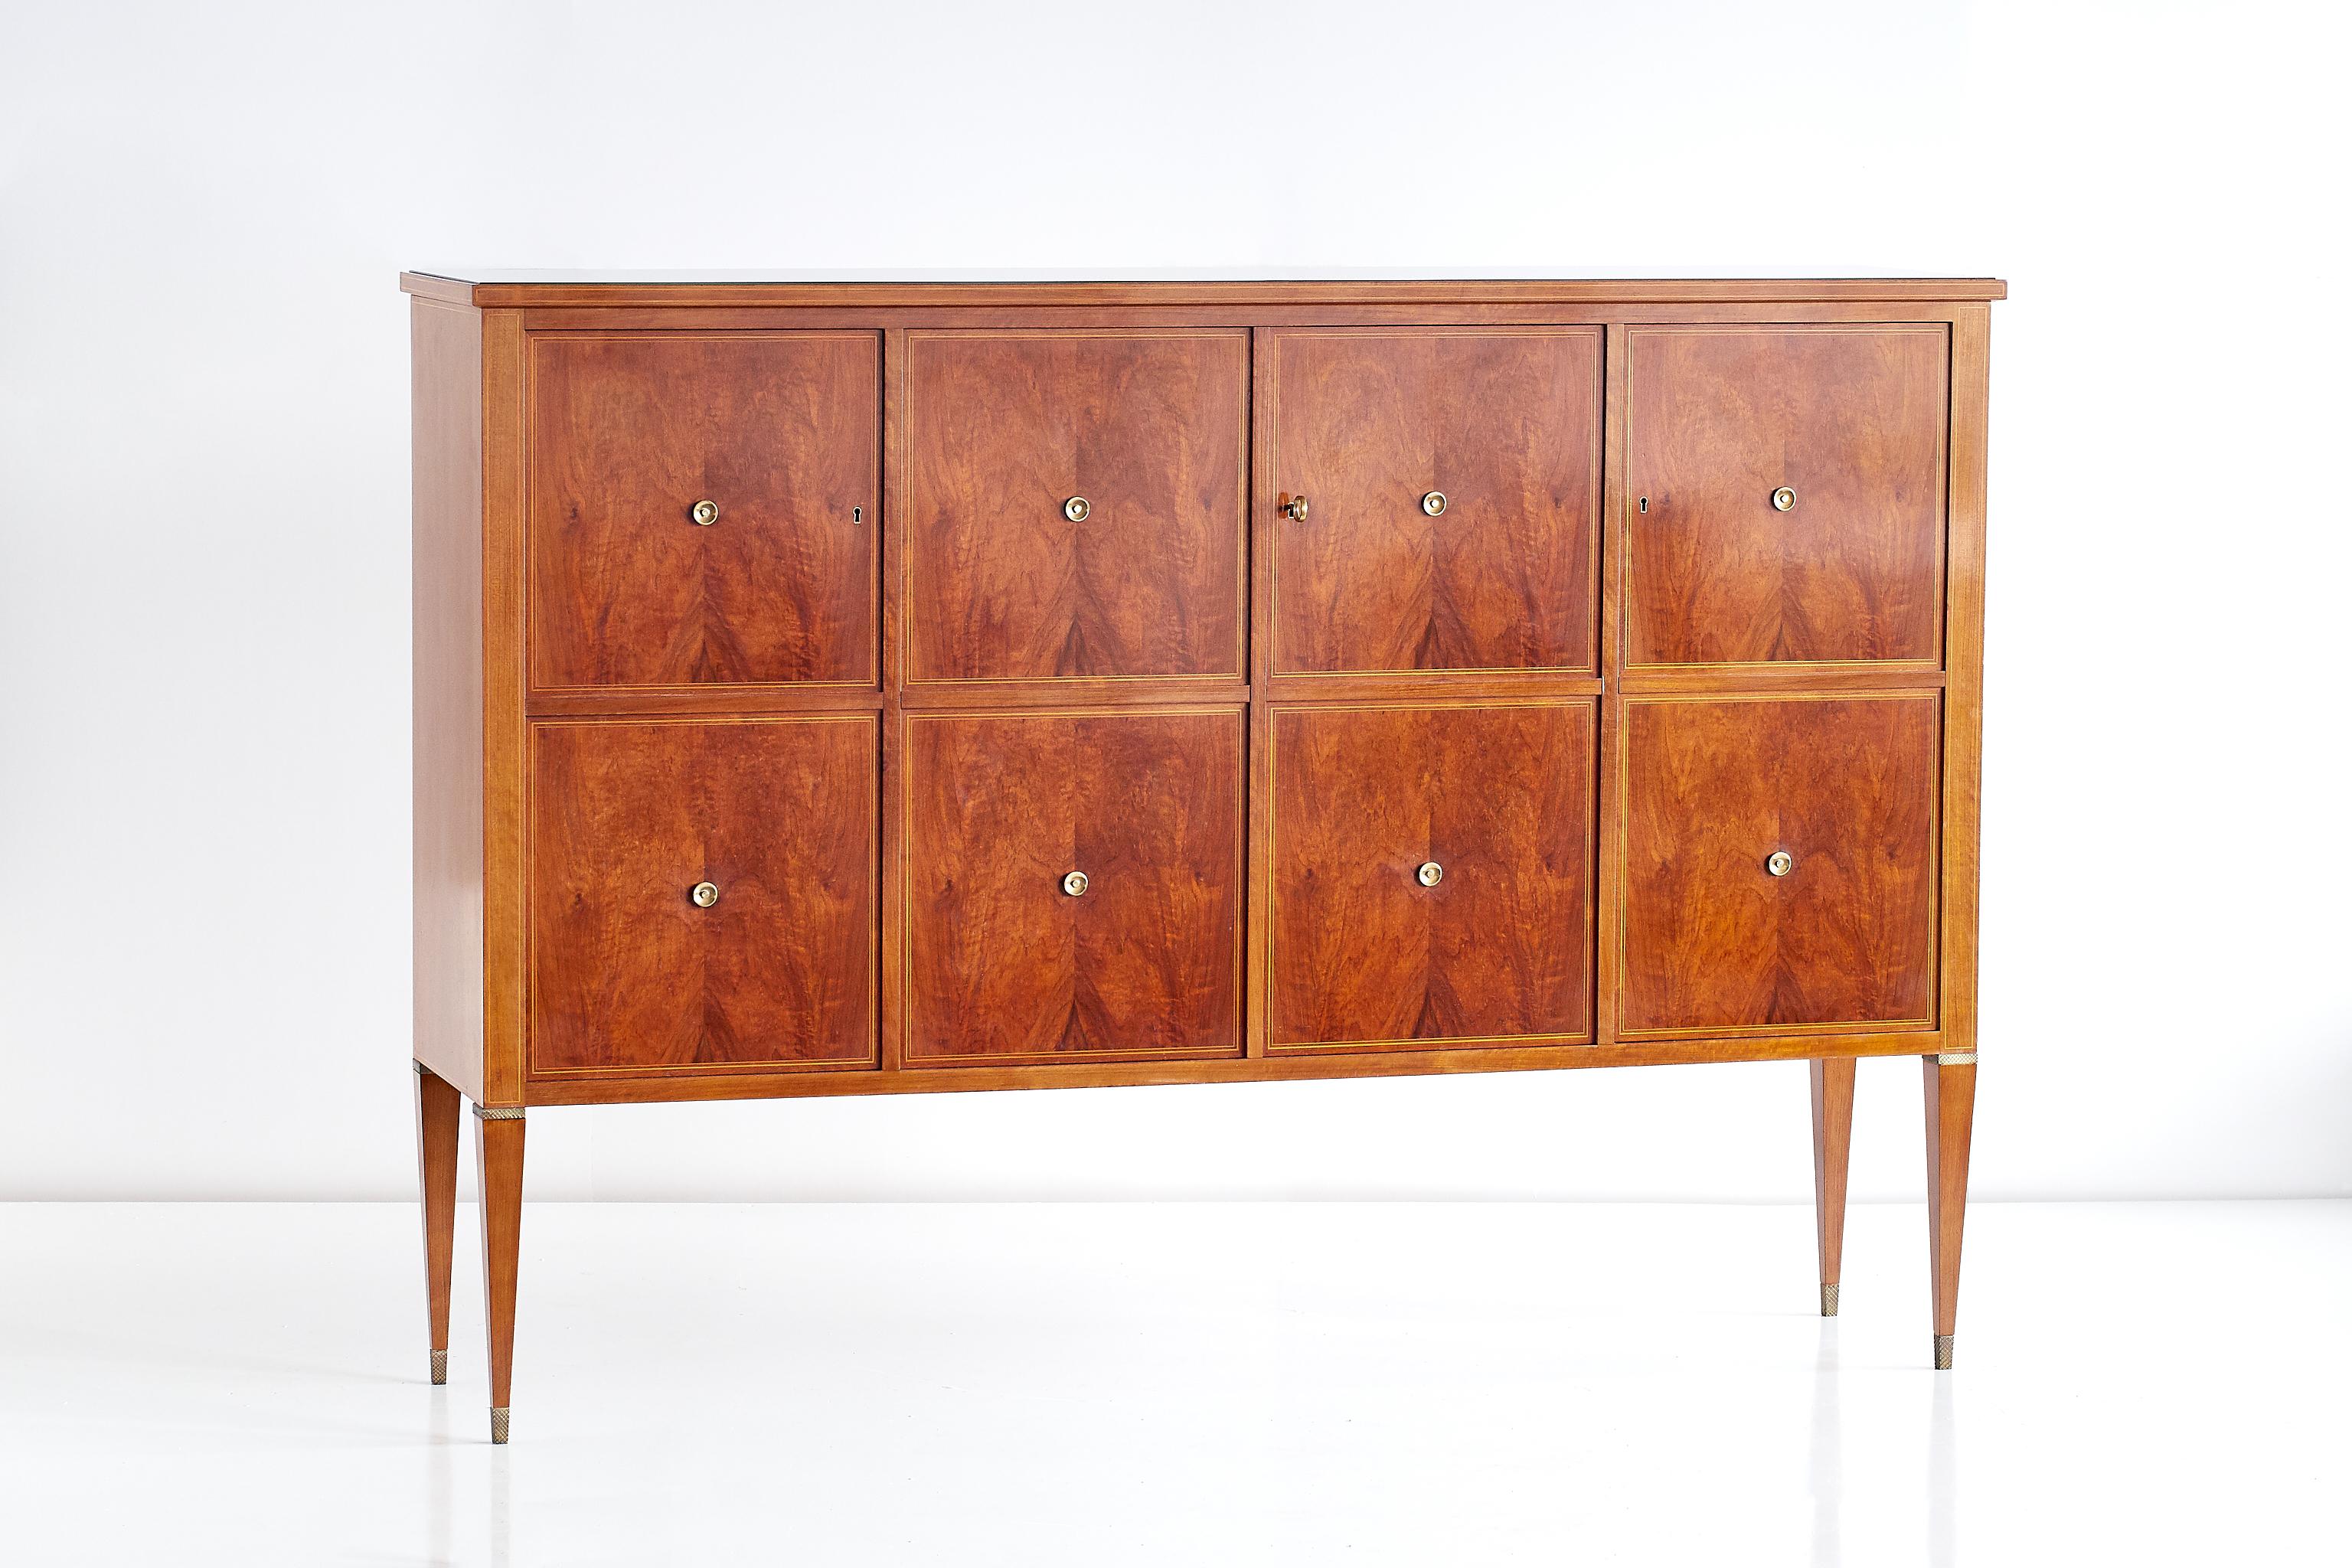 This large four-door panelled cabinet was designed by Paolo Buffa in the early 1950s. The composition of the striking grain of the eight mahogany veneered panels and the decorative brass details give the cabinet a refined and elegant appearance. The